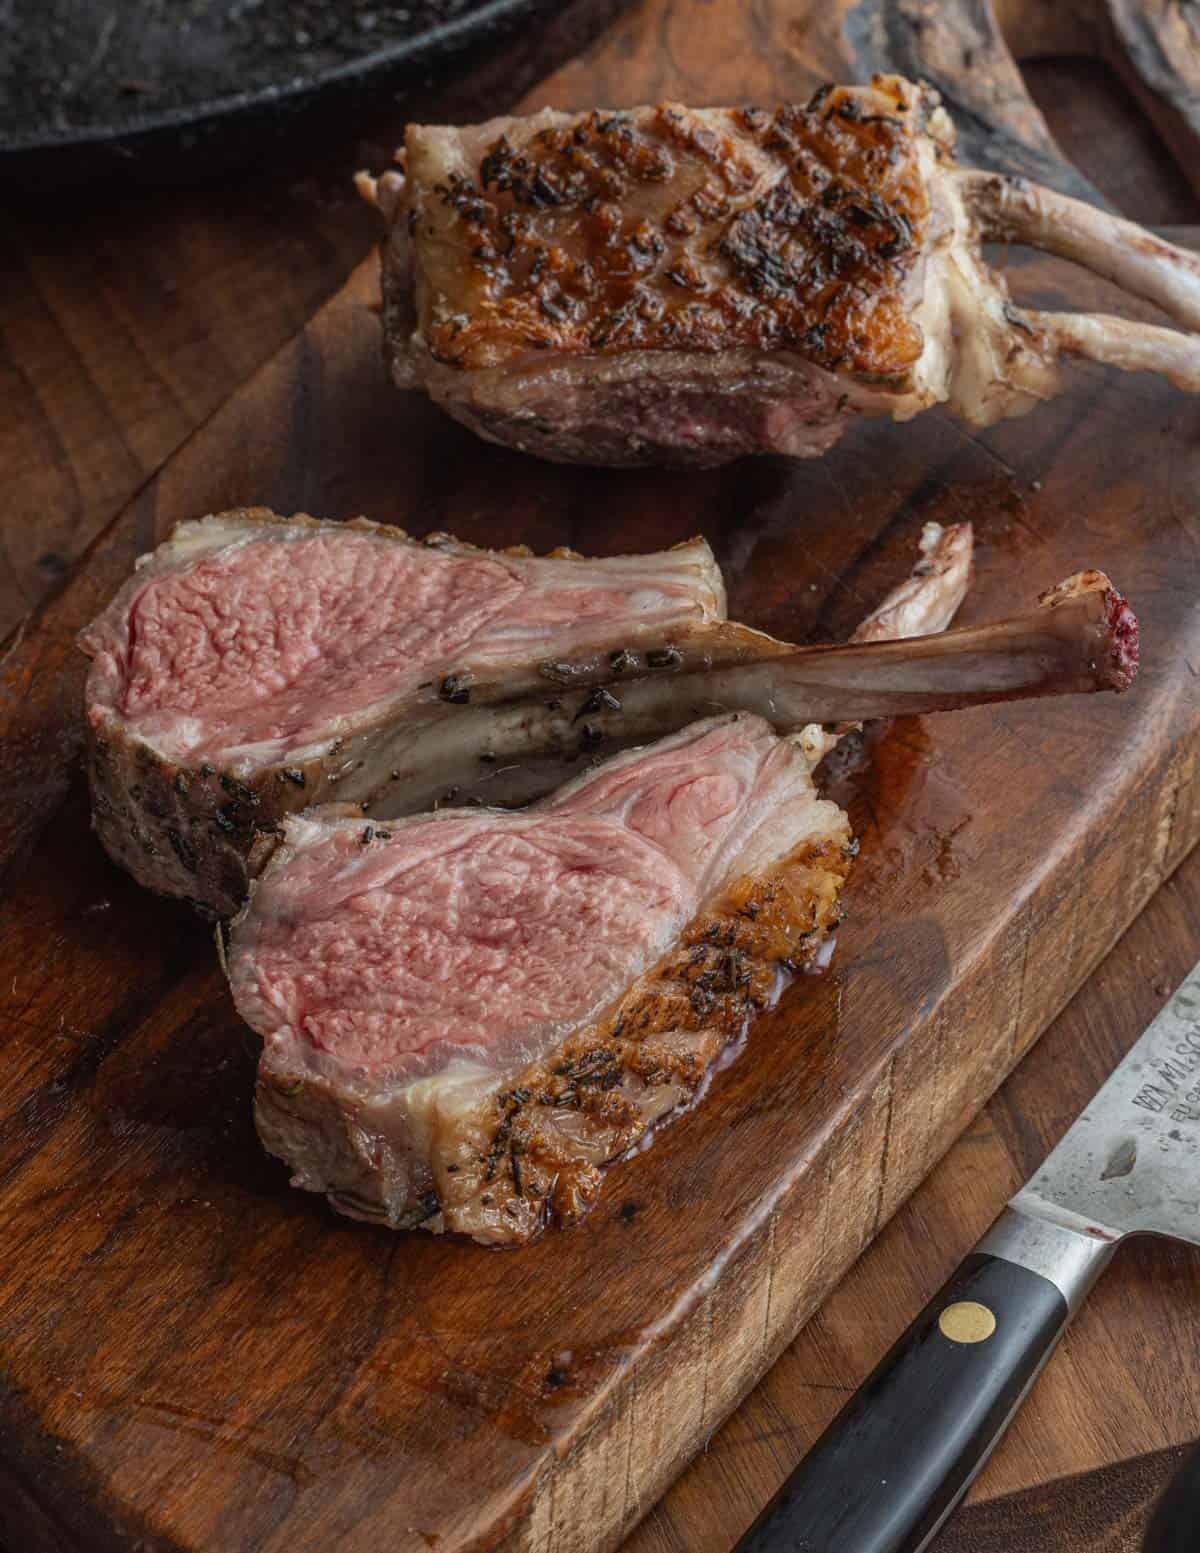 A carved rack of lamb showing two rib chops on a cutting board ready to eat.